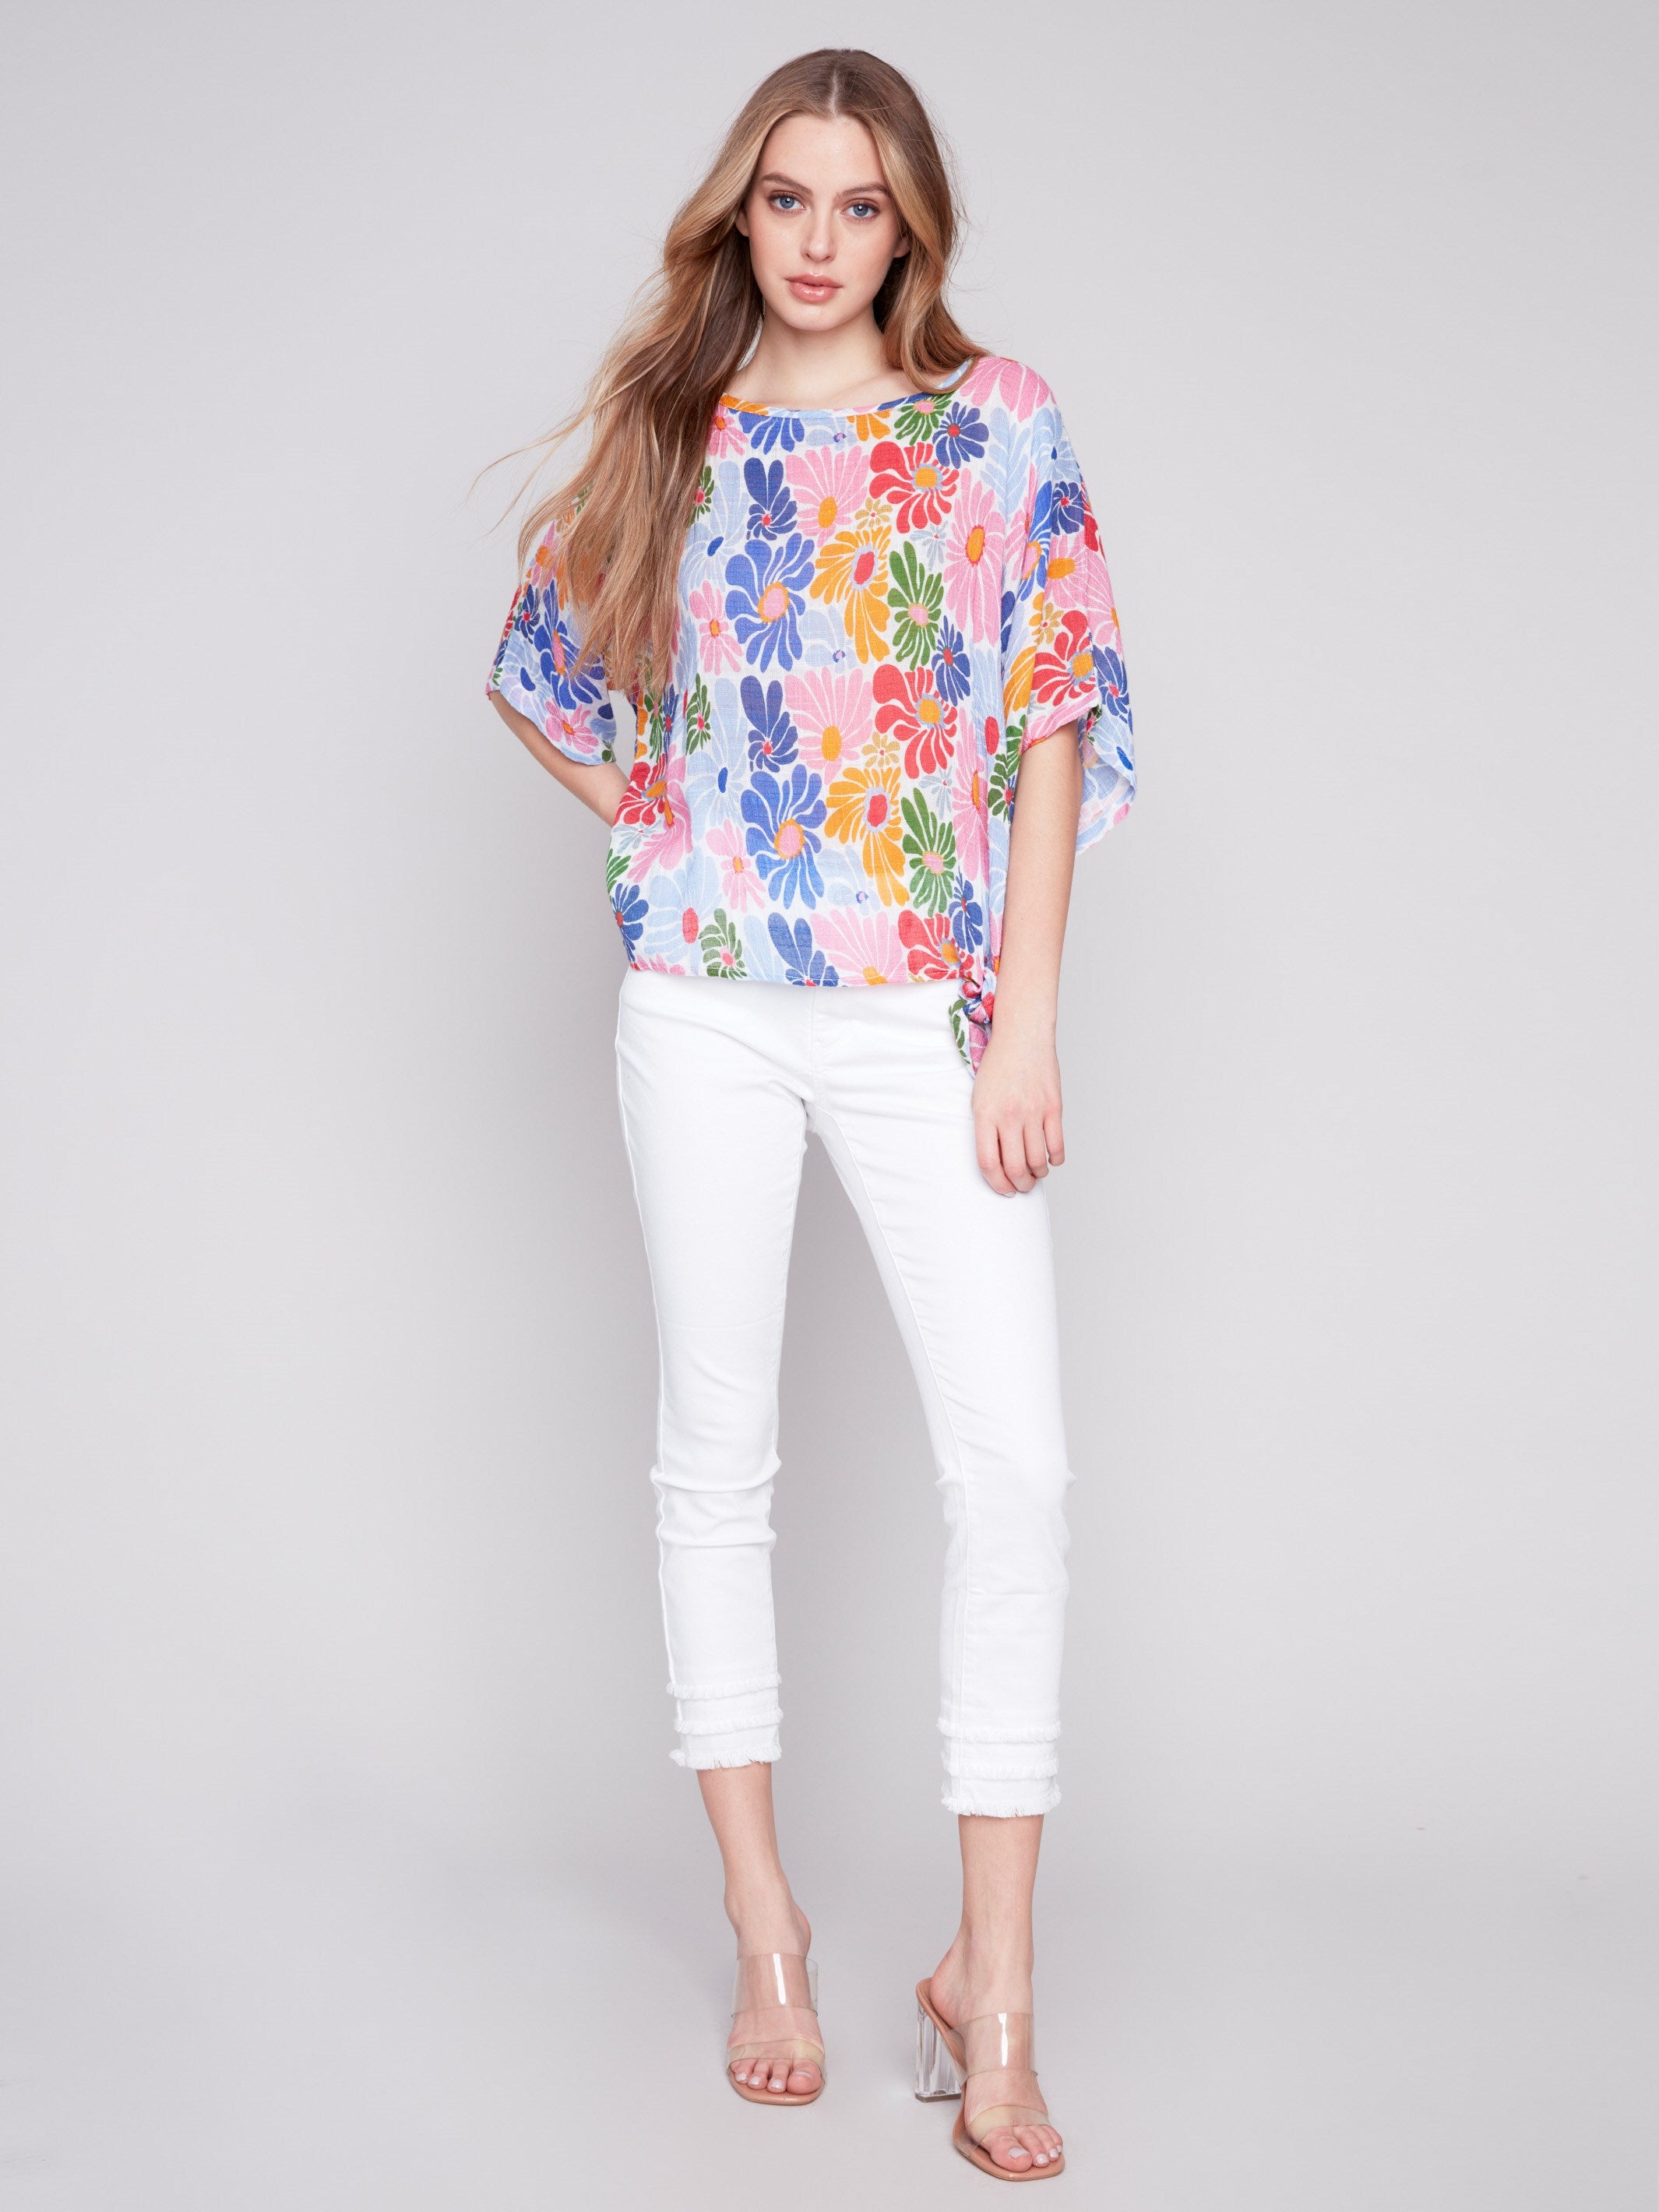 Printed Cotton Gauze Blouse with Side Tie - Multicolor - Charlie B Collection Canada - Image 3